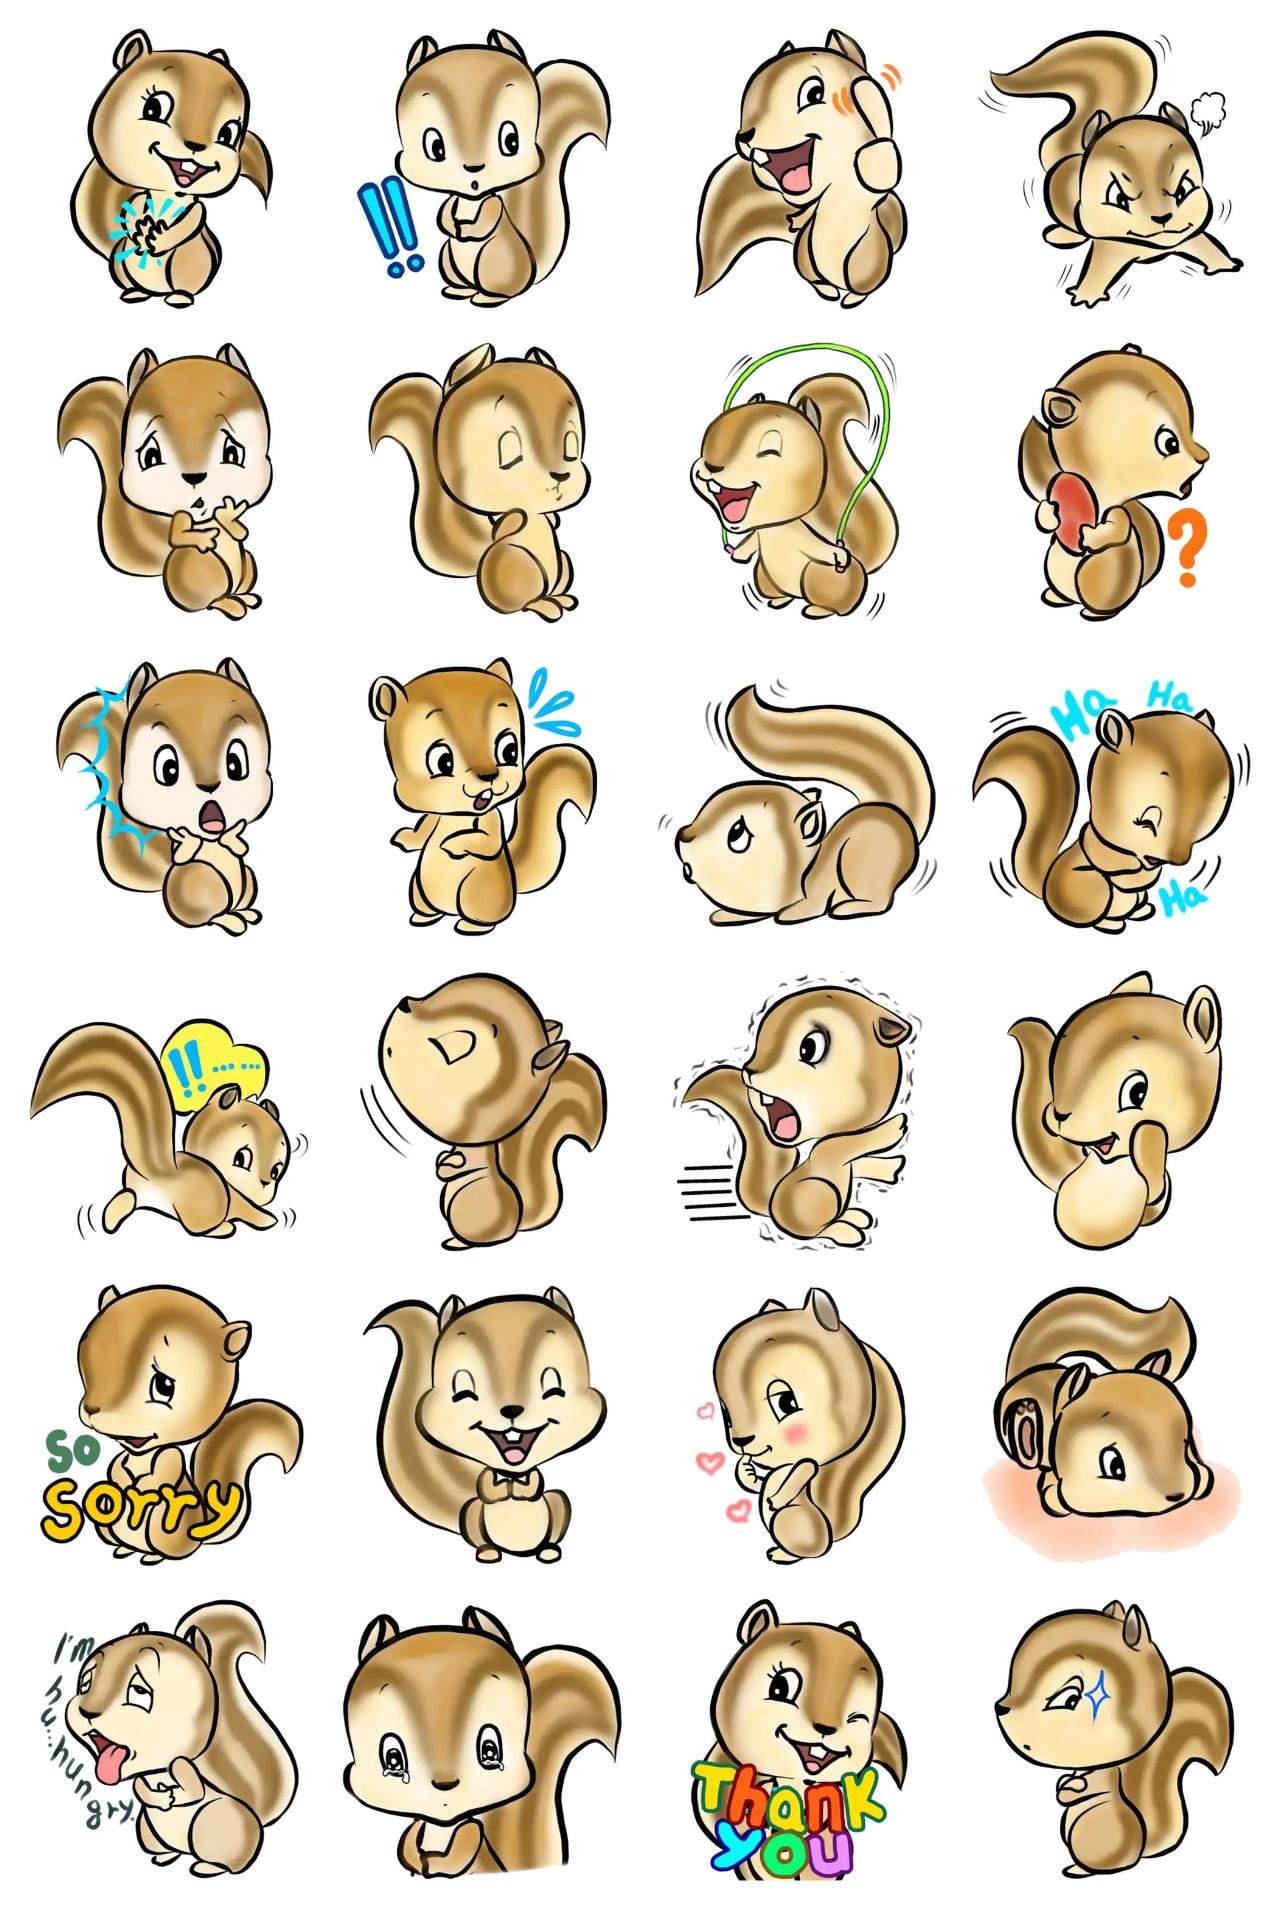 Baby Squirrel Dory Animals sticker pack for Whatsapp, Telegram, Signal, and others chatting and message apps